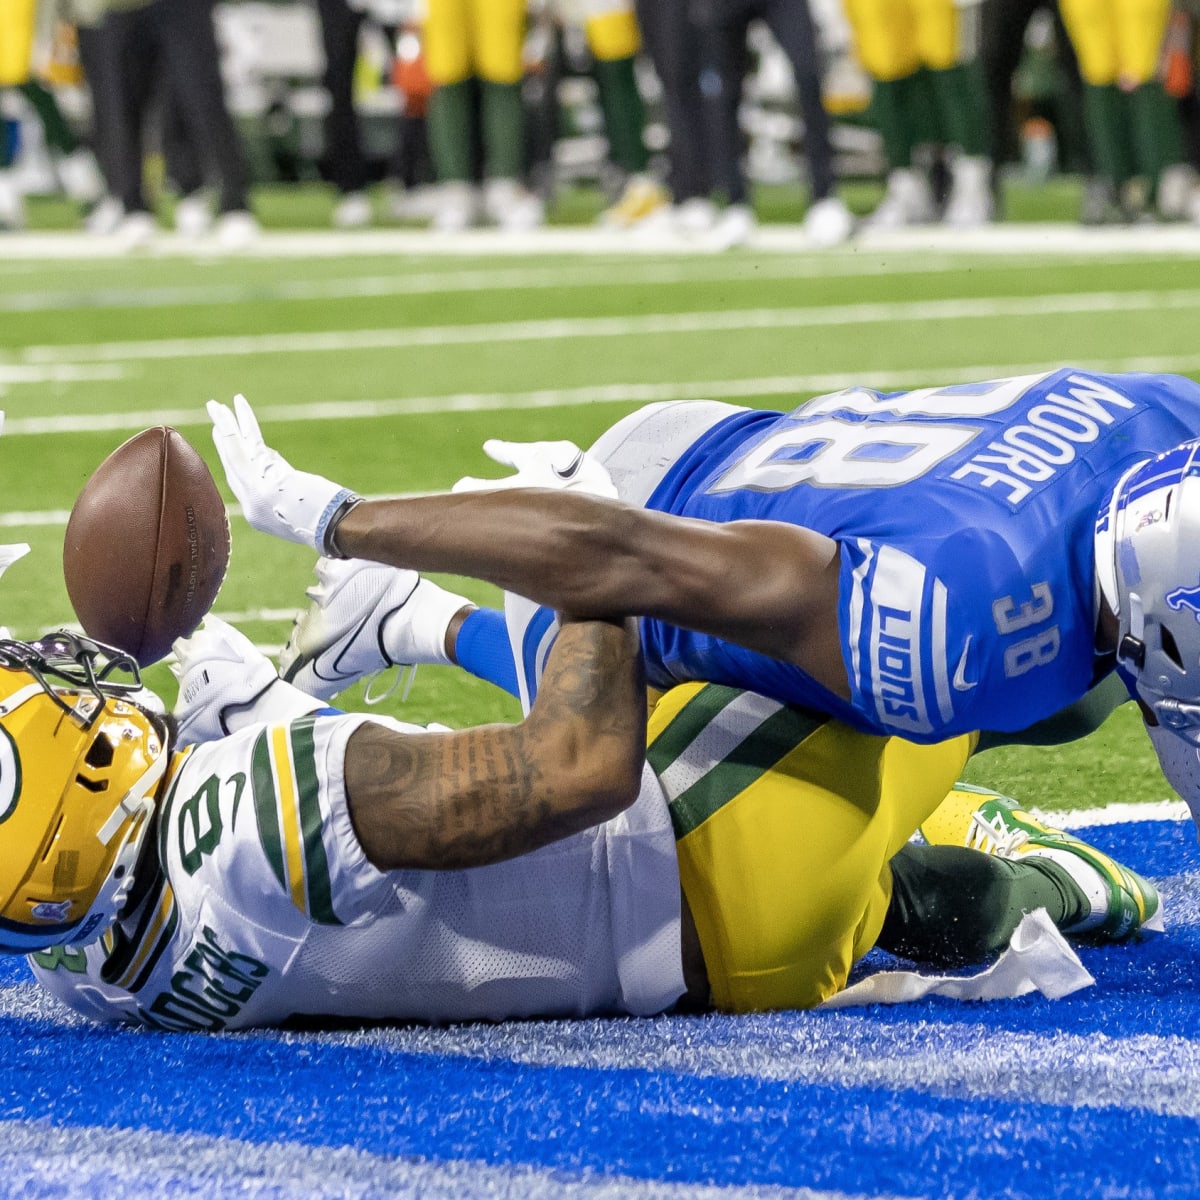 Watch: from Packers' Loss at Lions - Sports Green Bay Packers News, Analysis and More